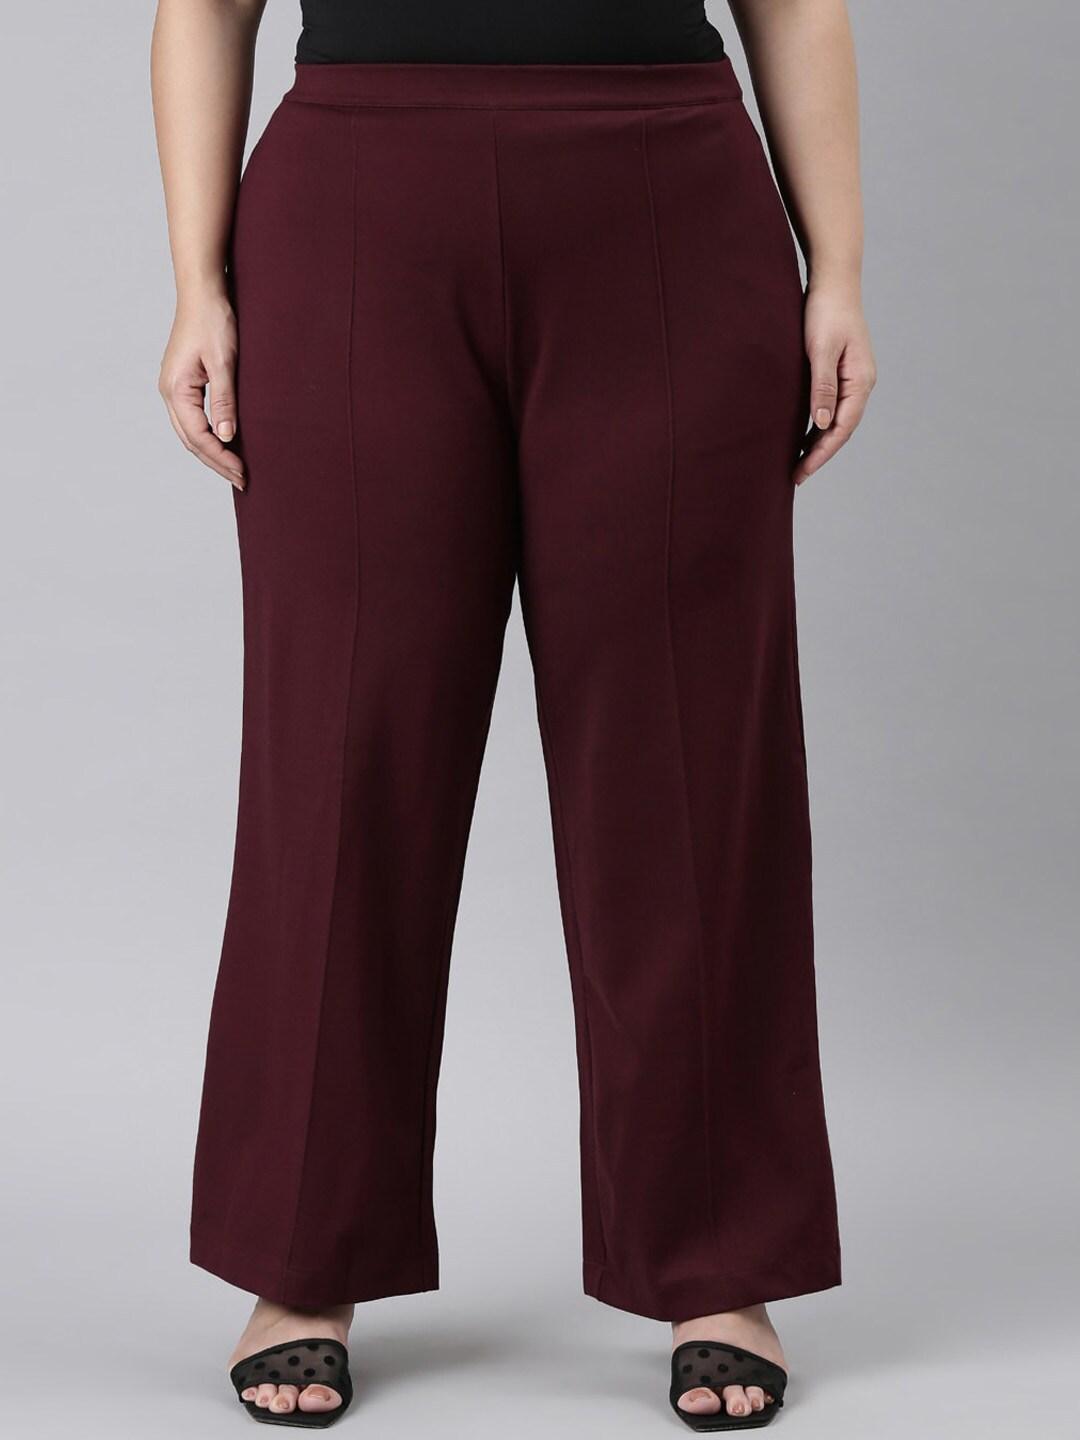 go-colors-plus-size-women-relaxed-loose-fit-high-rise-parallel-trouser